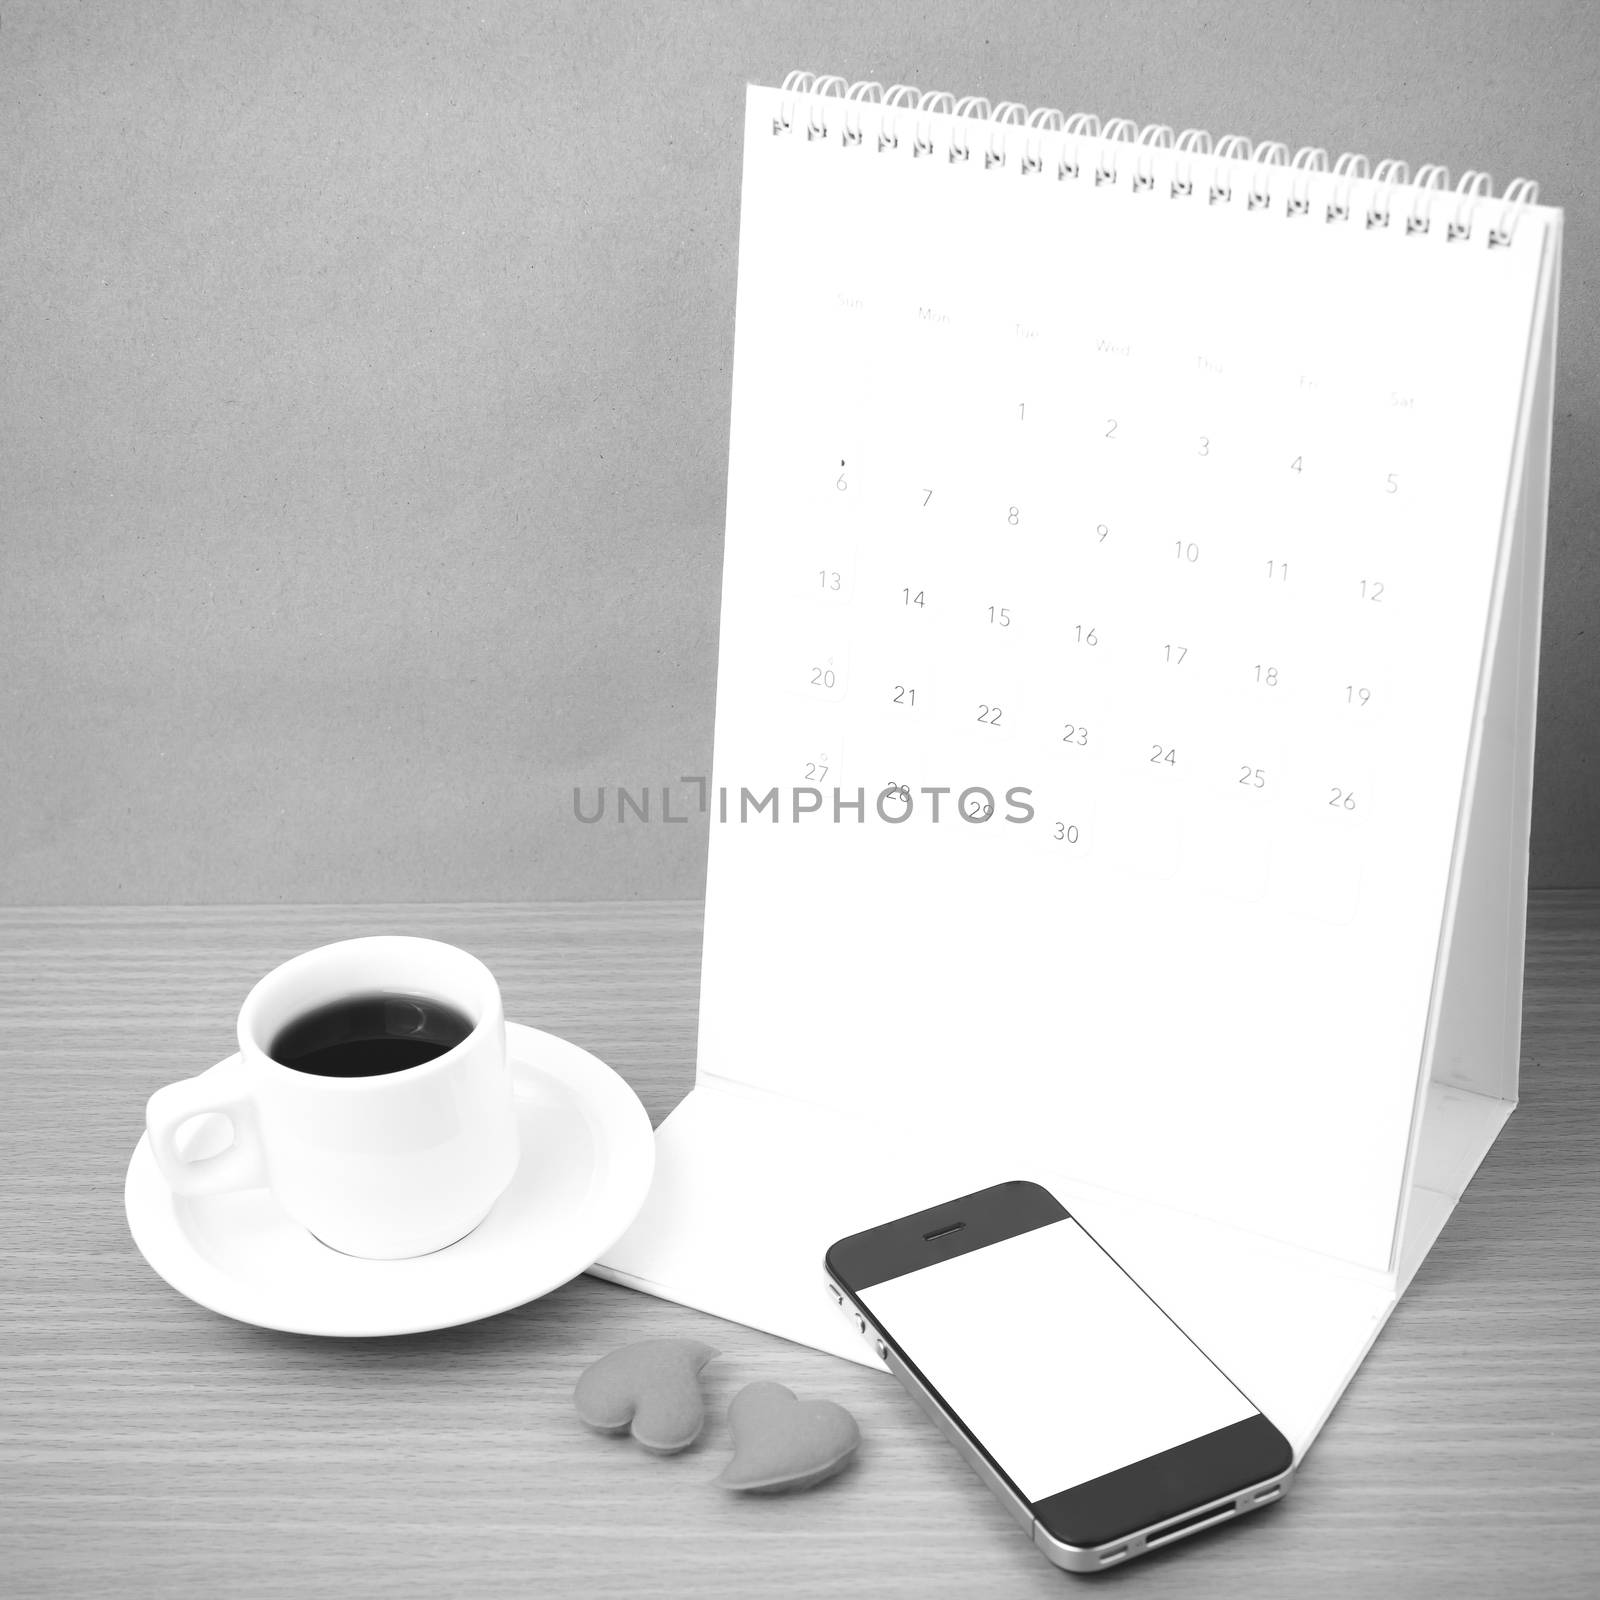 coffee,phone,calendar and heart on wood table background black and white color